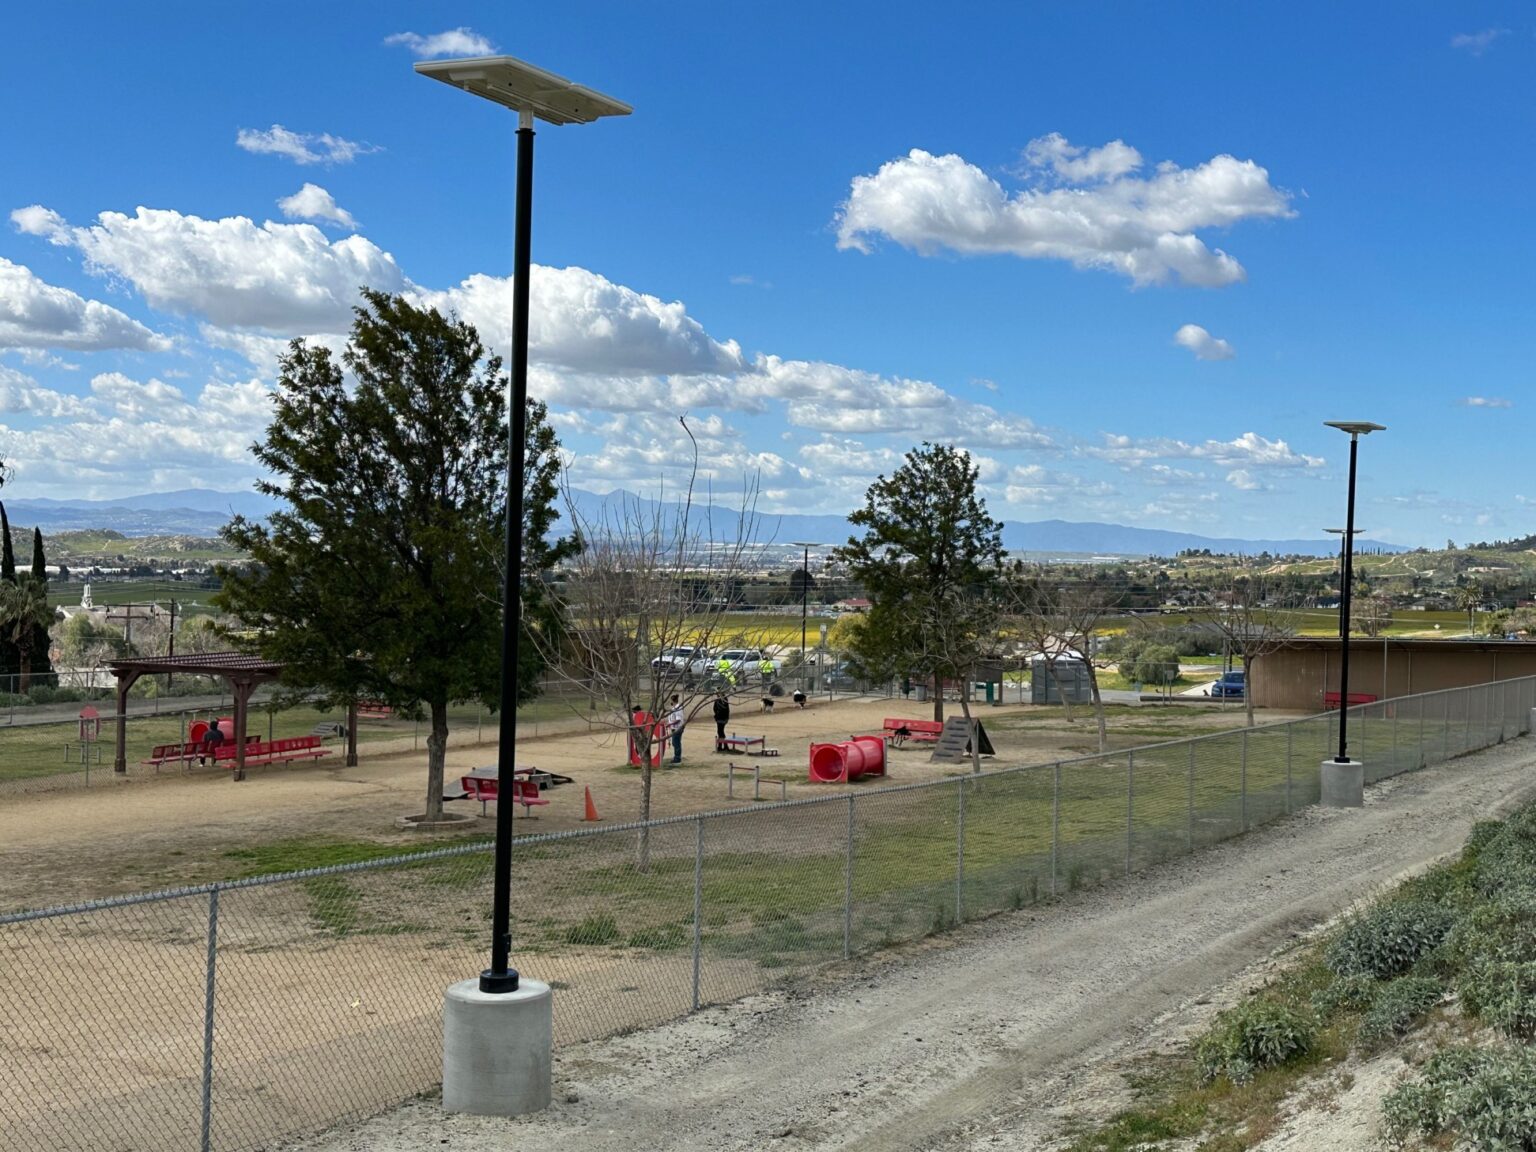 Two of Sol's iSSL solar lights at a dog park with agility equipment, trees, and covered areas with benches